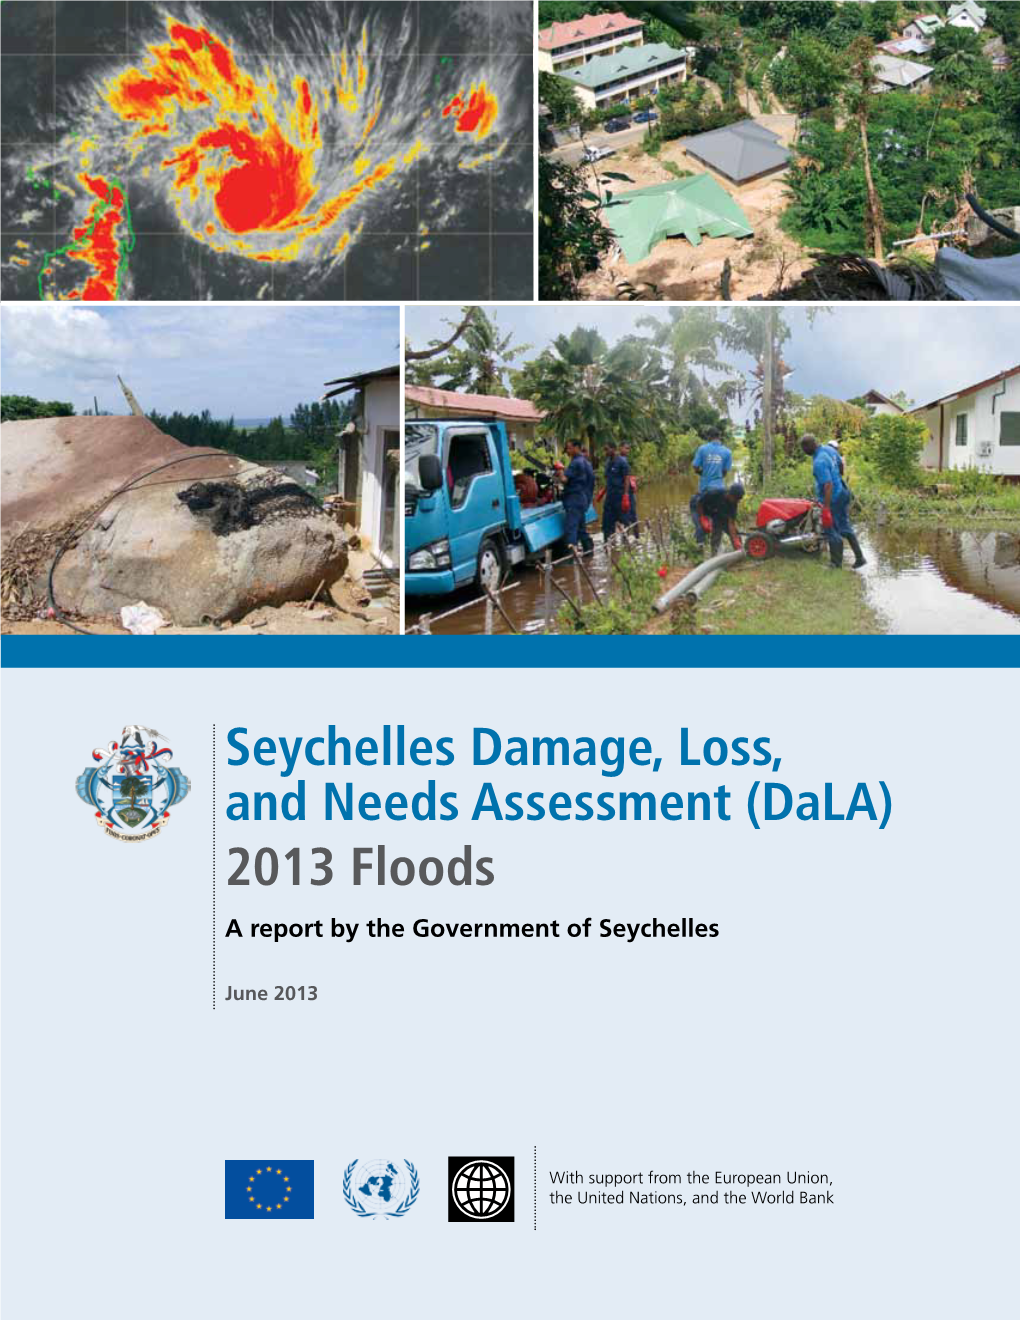 Seychelles Damage, Loss, and Needs Assessment (Dala) 2013 Floods a Report by the Government of Seychelles